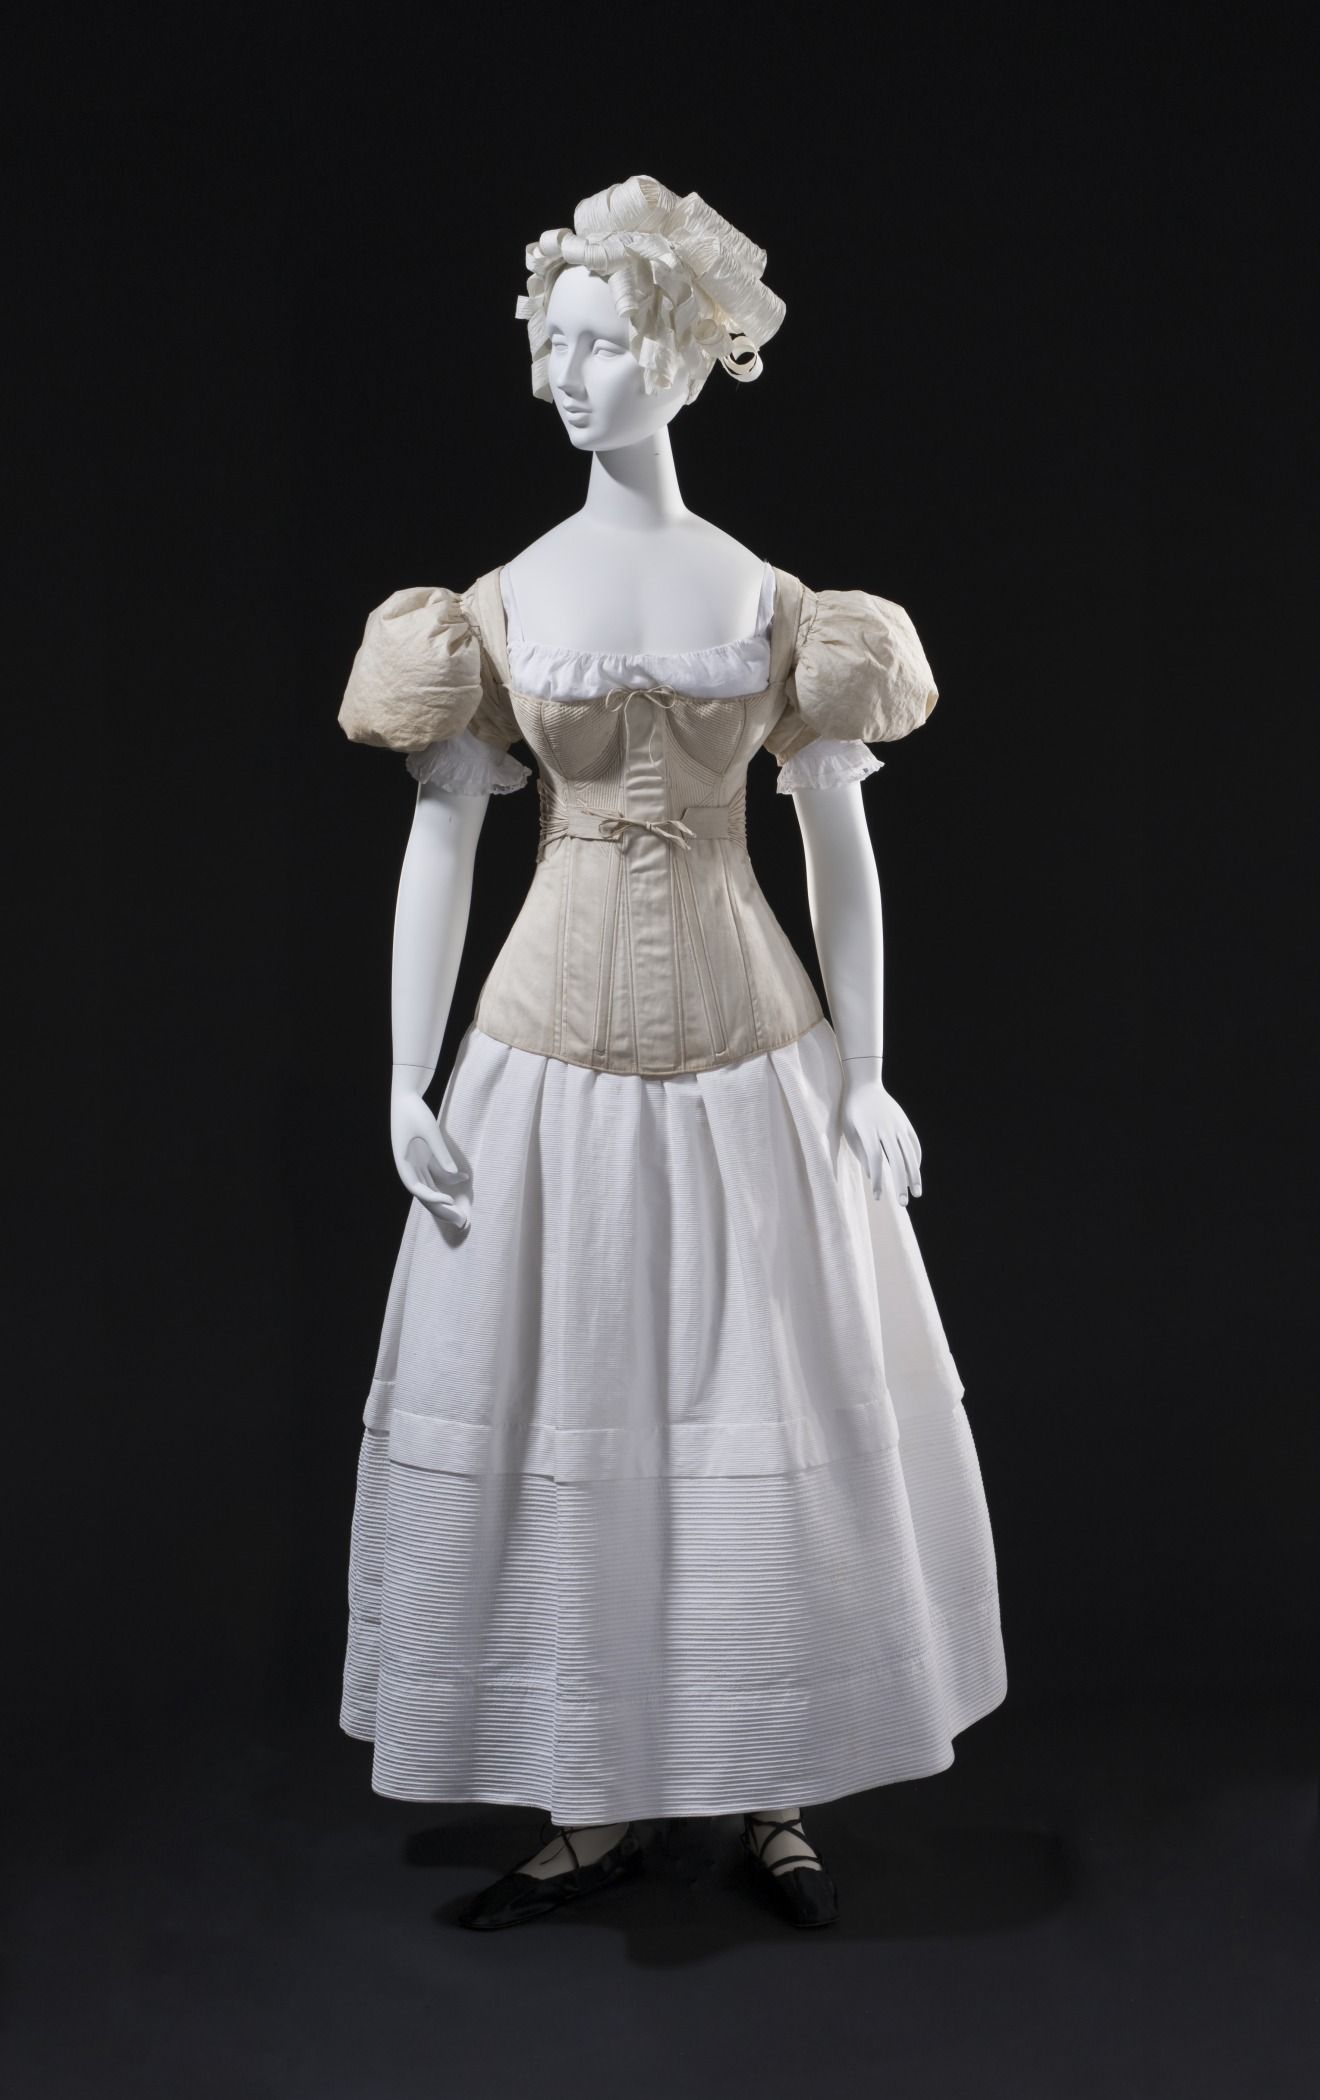 WikiVictorian on X: This fabric made its first appearance in